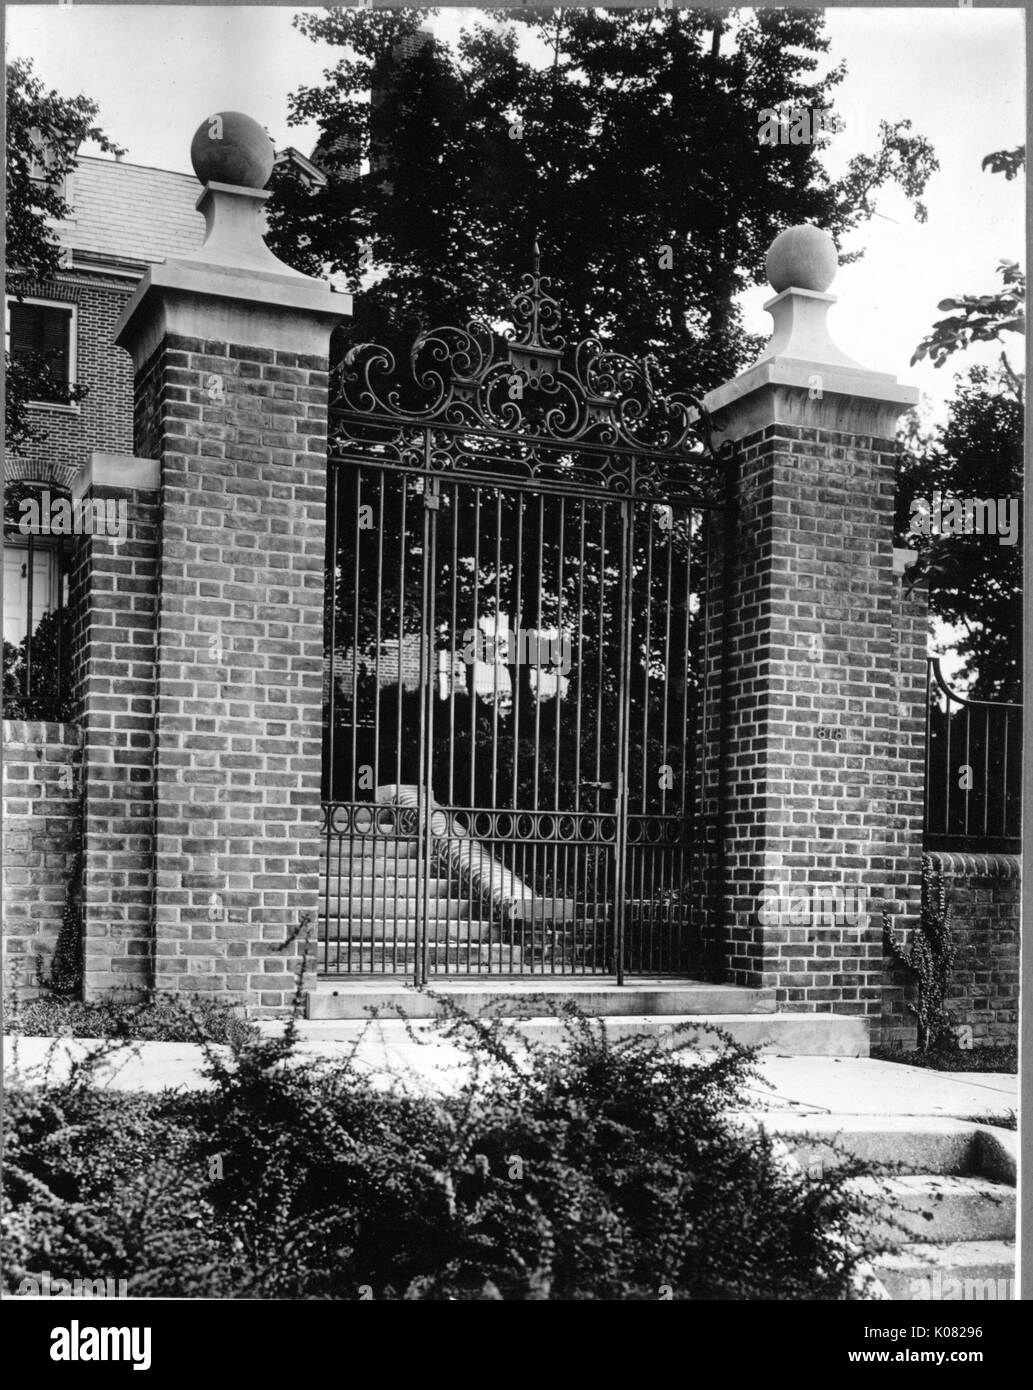 An ornate gate with brick pillars sits between two sets of steps, which lead to a brick home in Baltimore, Maryland, 1910. This image is from a series documenting the construction and sale of homes in the Roland Park/Guilford neighborhood of Baltimore, a streetcar suburb and one of the first planned communities in the United States. Stock Photo